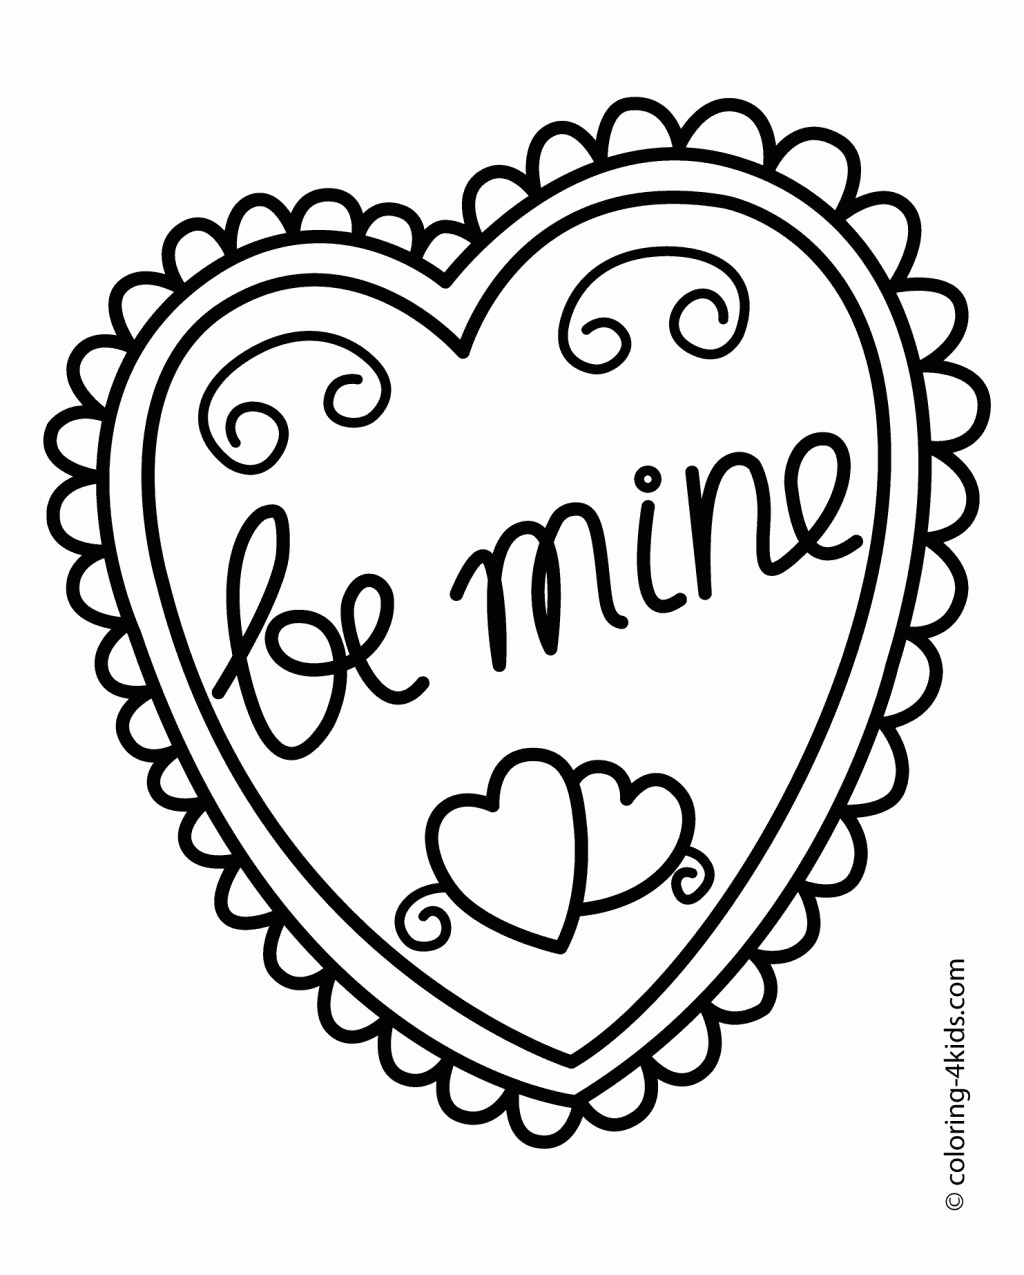 Preschool Valentines Day Coloring Pages Coloring Ideas Staggering Valentines Day Coloring Pages For